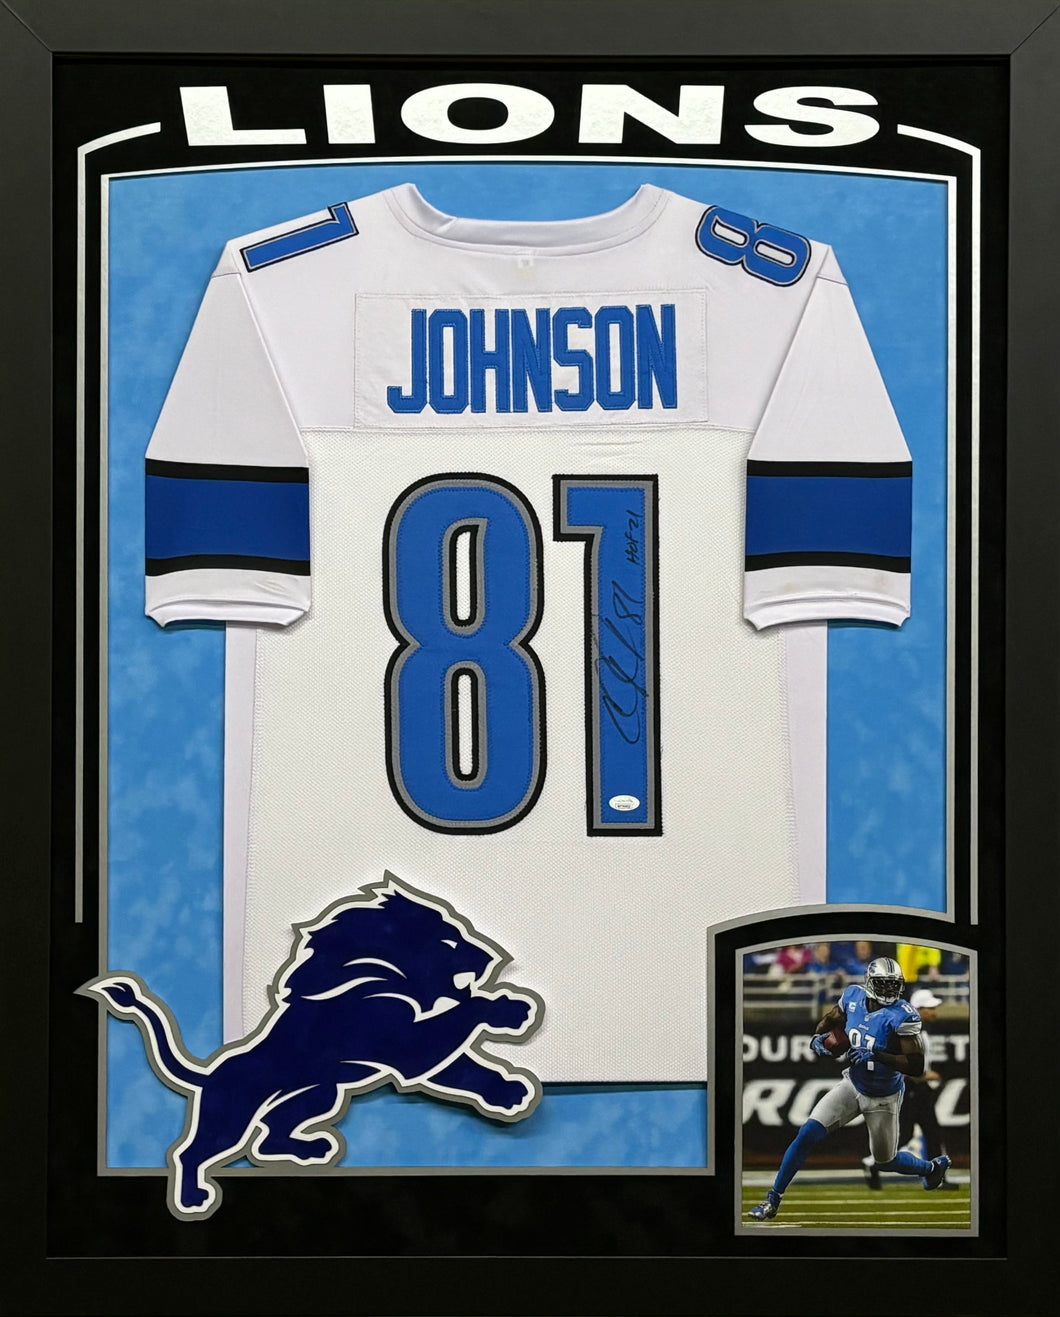 Detroit Lions Calvin Johnson Signed White Jersey with HOF 21 Inscription Framed & Suede Matted with XL 3D Logo & Team Name Cutout JSA COA